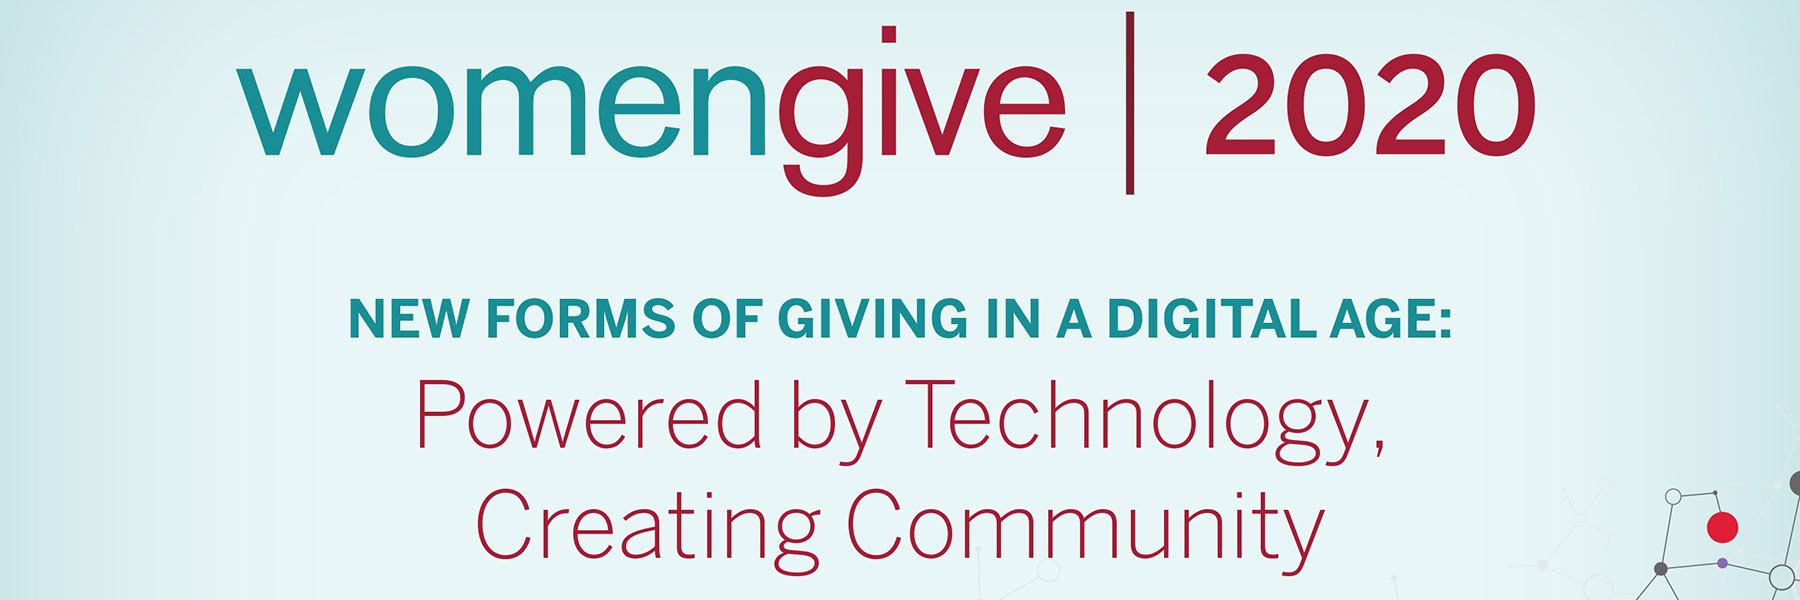 Women Give 2020: New Forms of Giving in a Digital Age: Powered by Technology, Creating Community